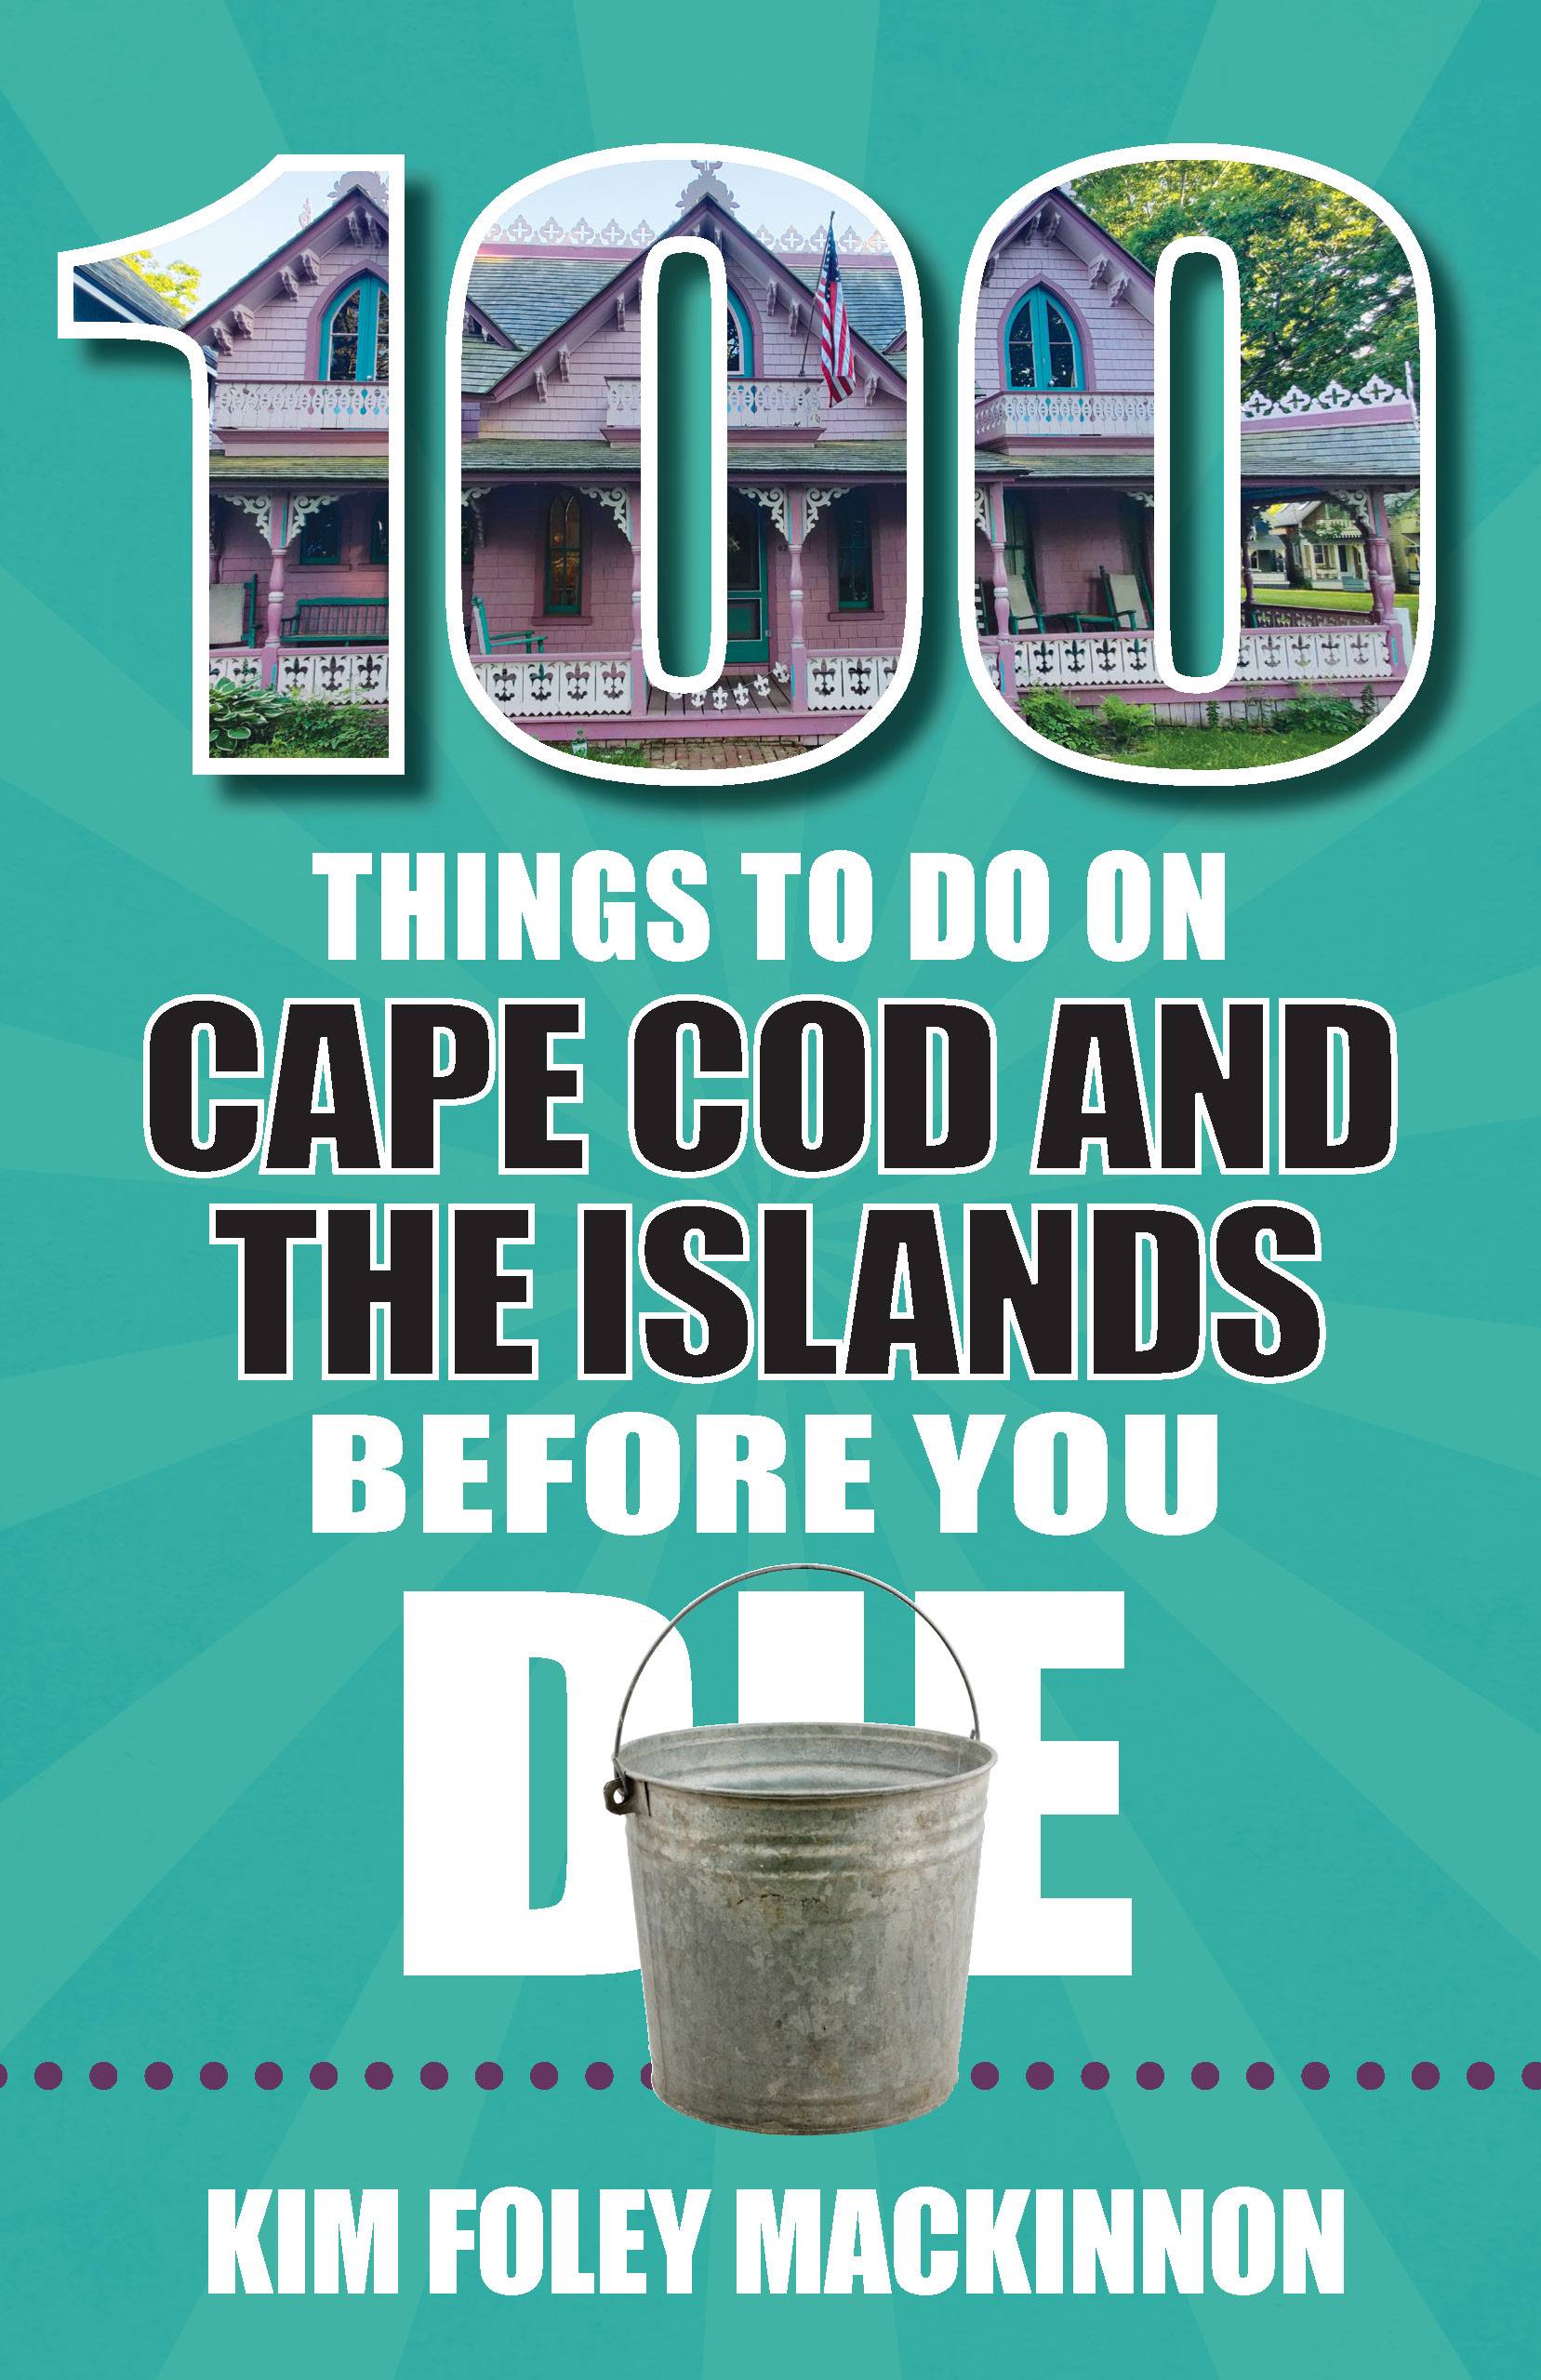 100_Things_to_Do_on_Cape_Cod_and_the_Islands_Before_You_Die_front_cover.jpeg